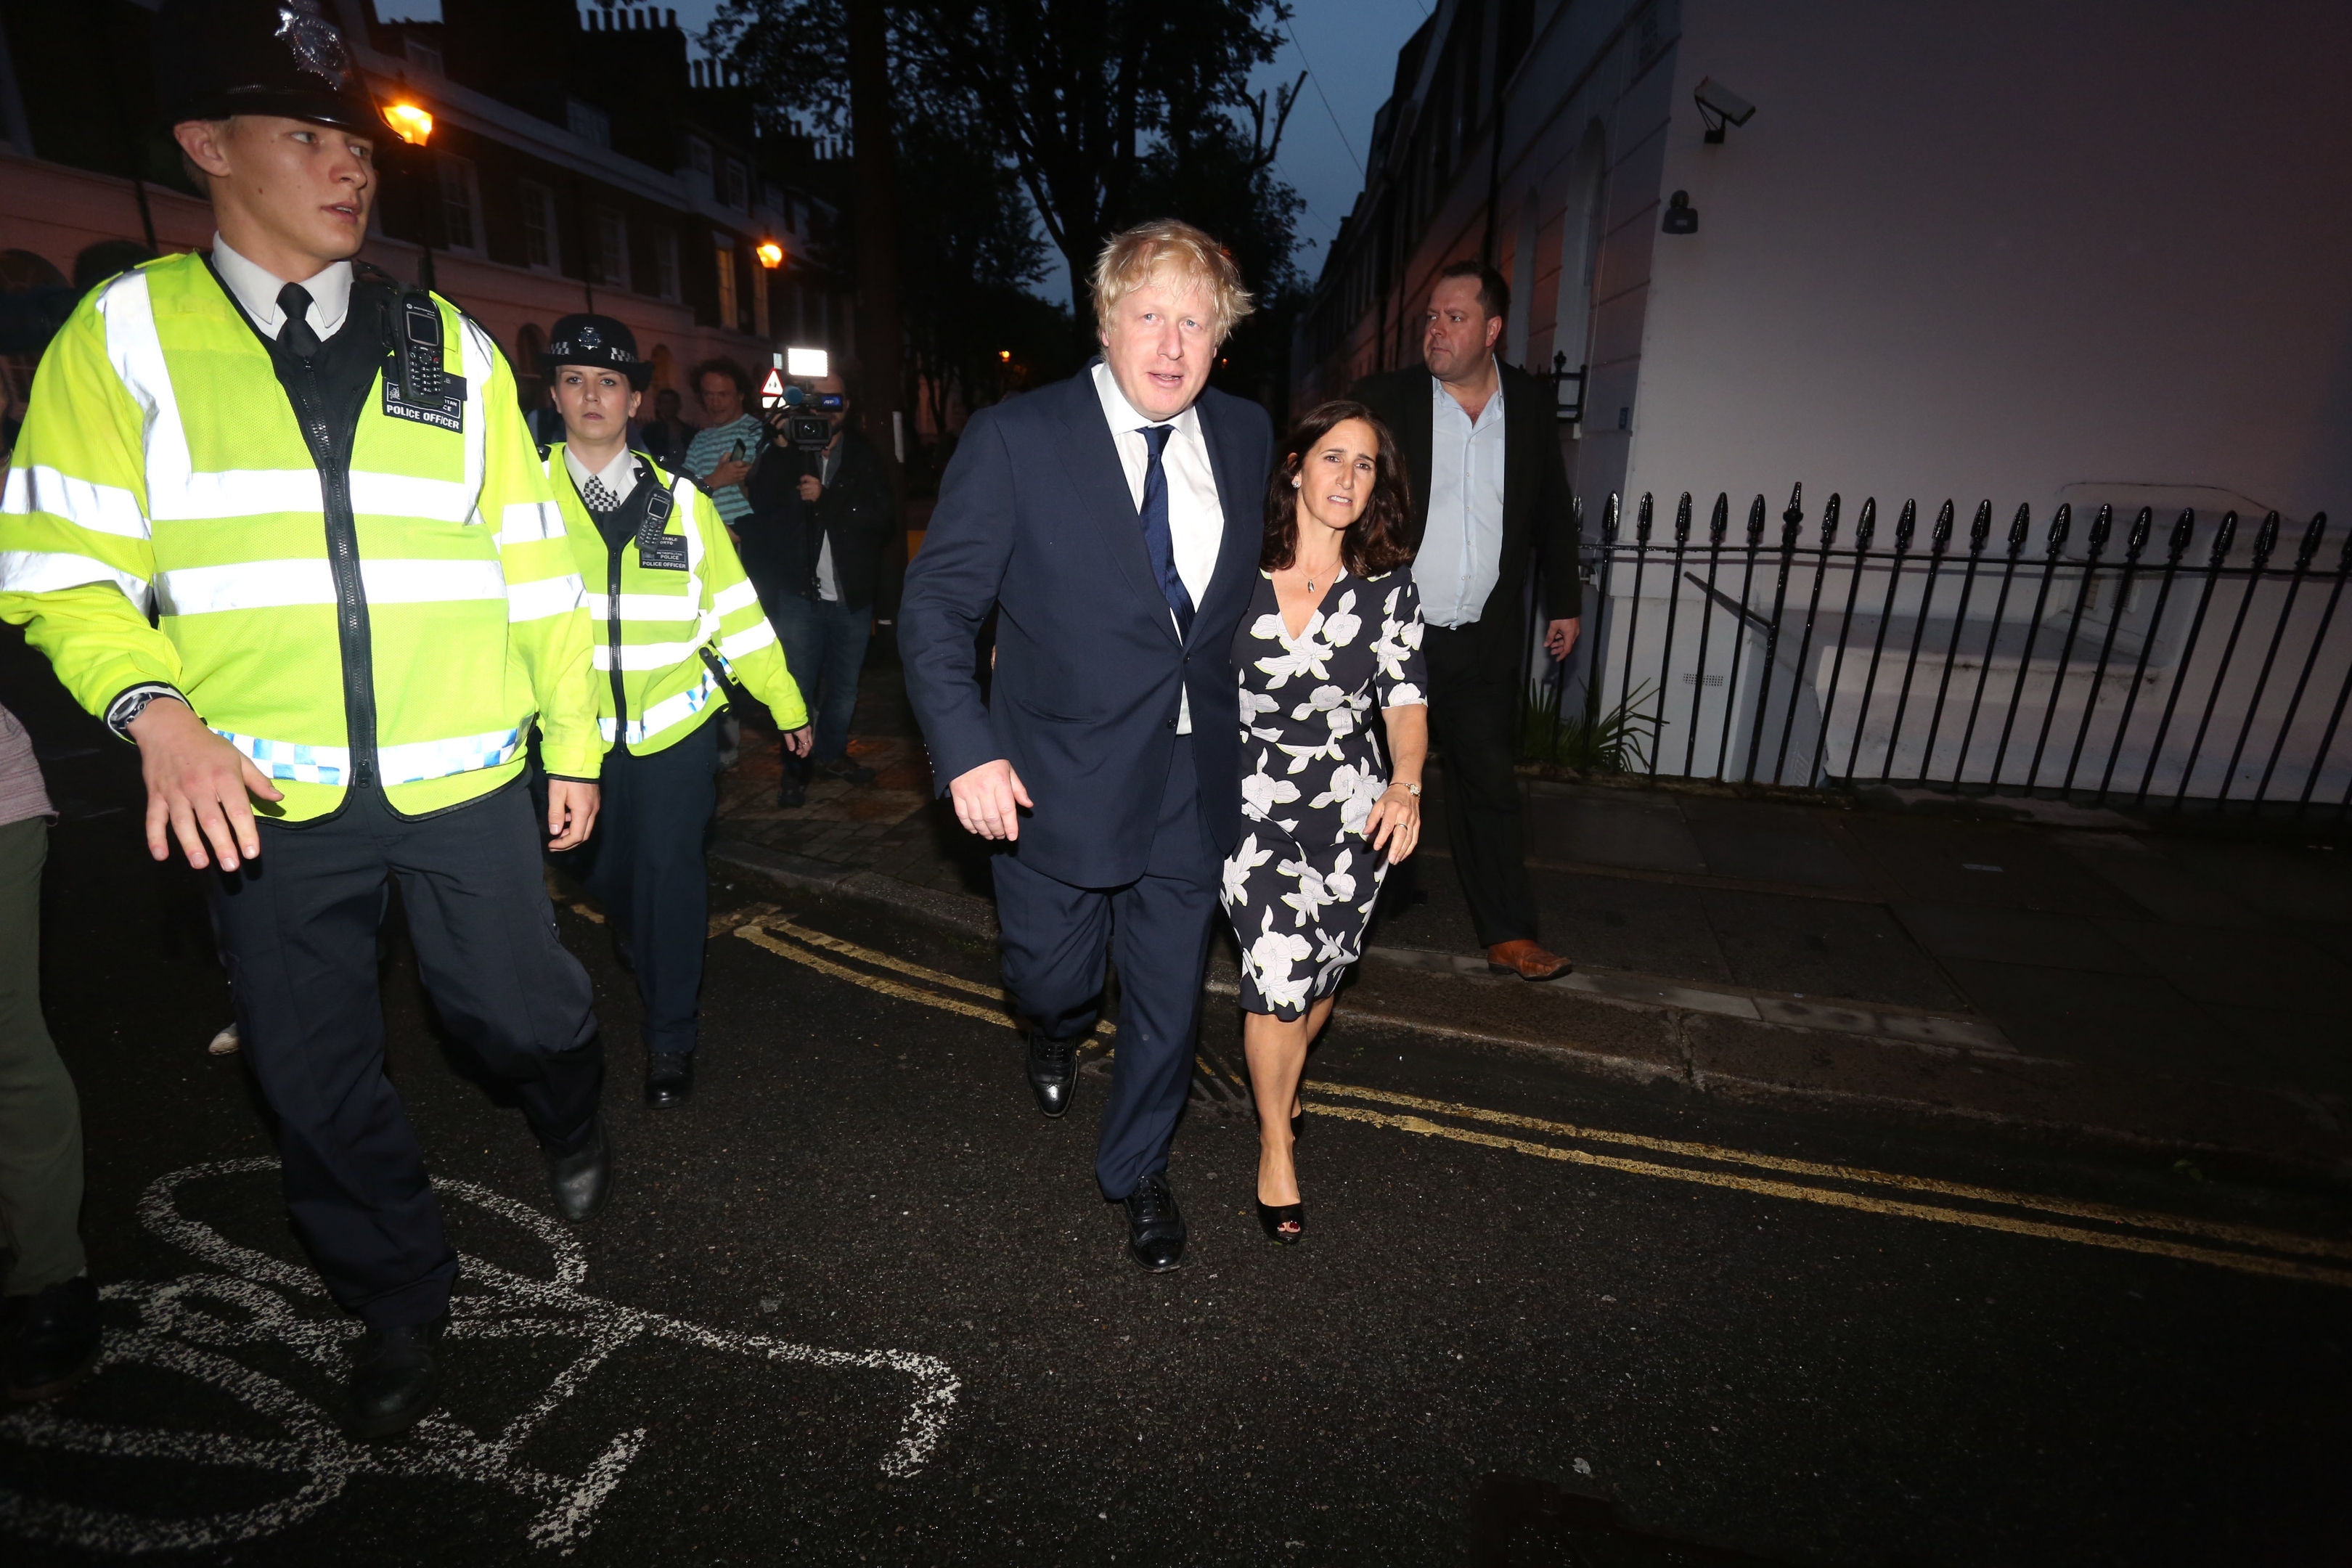 Boris Johnson and his wife Marina leave after casting their votes